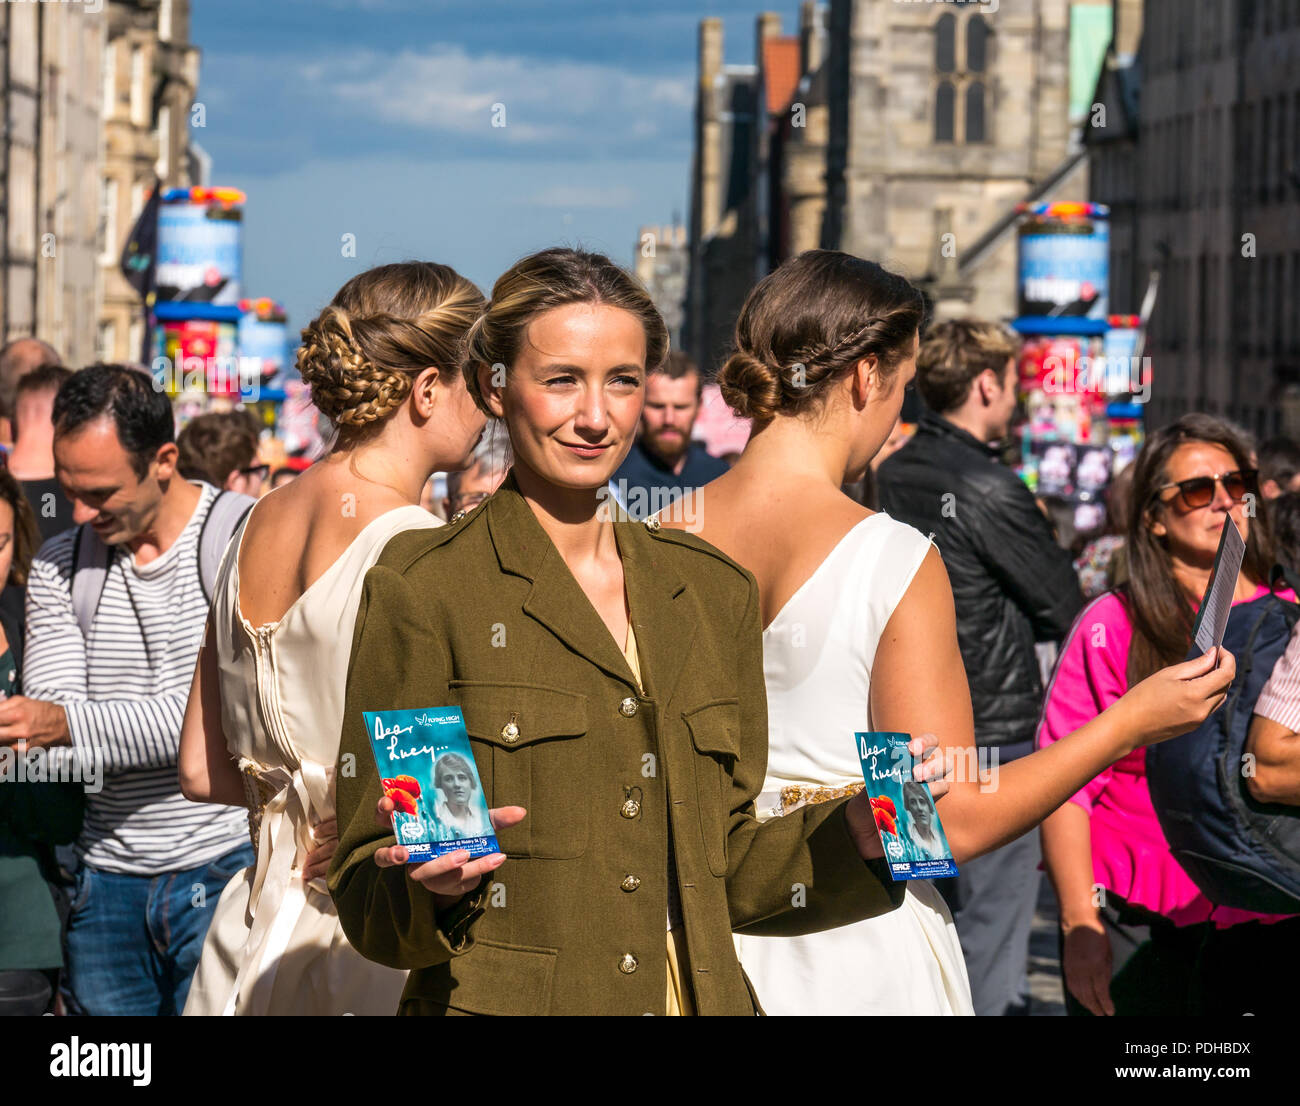 Edinburgh, Scotland, UK. 9th August 2018. Edinburgh Fringe Festival, Royal Mile, Edinburgh, Scotland, United Kingdom. On a sunny festival day the Virgin Money sponsored street festival is packed with people and fringe performers. A group of pretty young women dressed in World War II era costumes hand out flyers for their Fringe Show called Dear Lucy Stock Photo